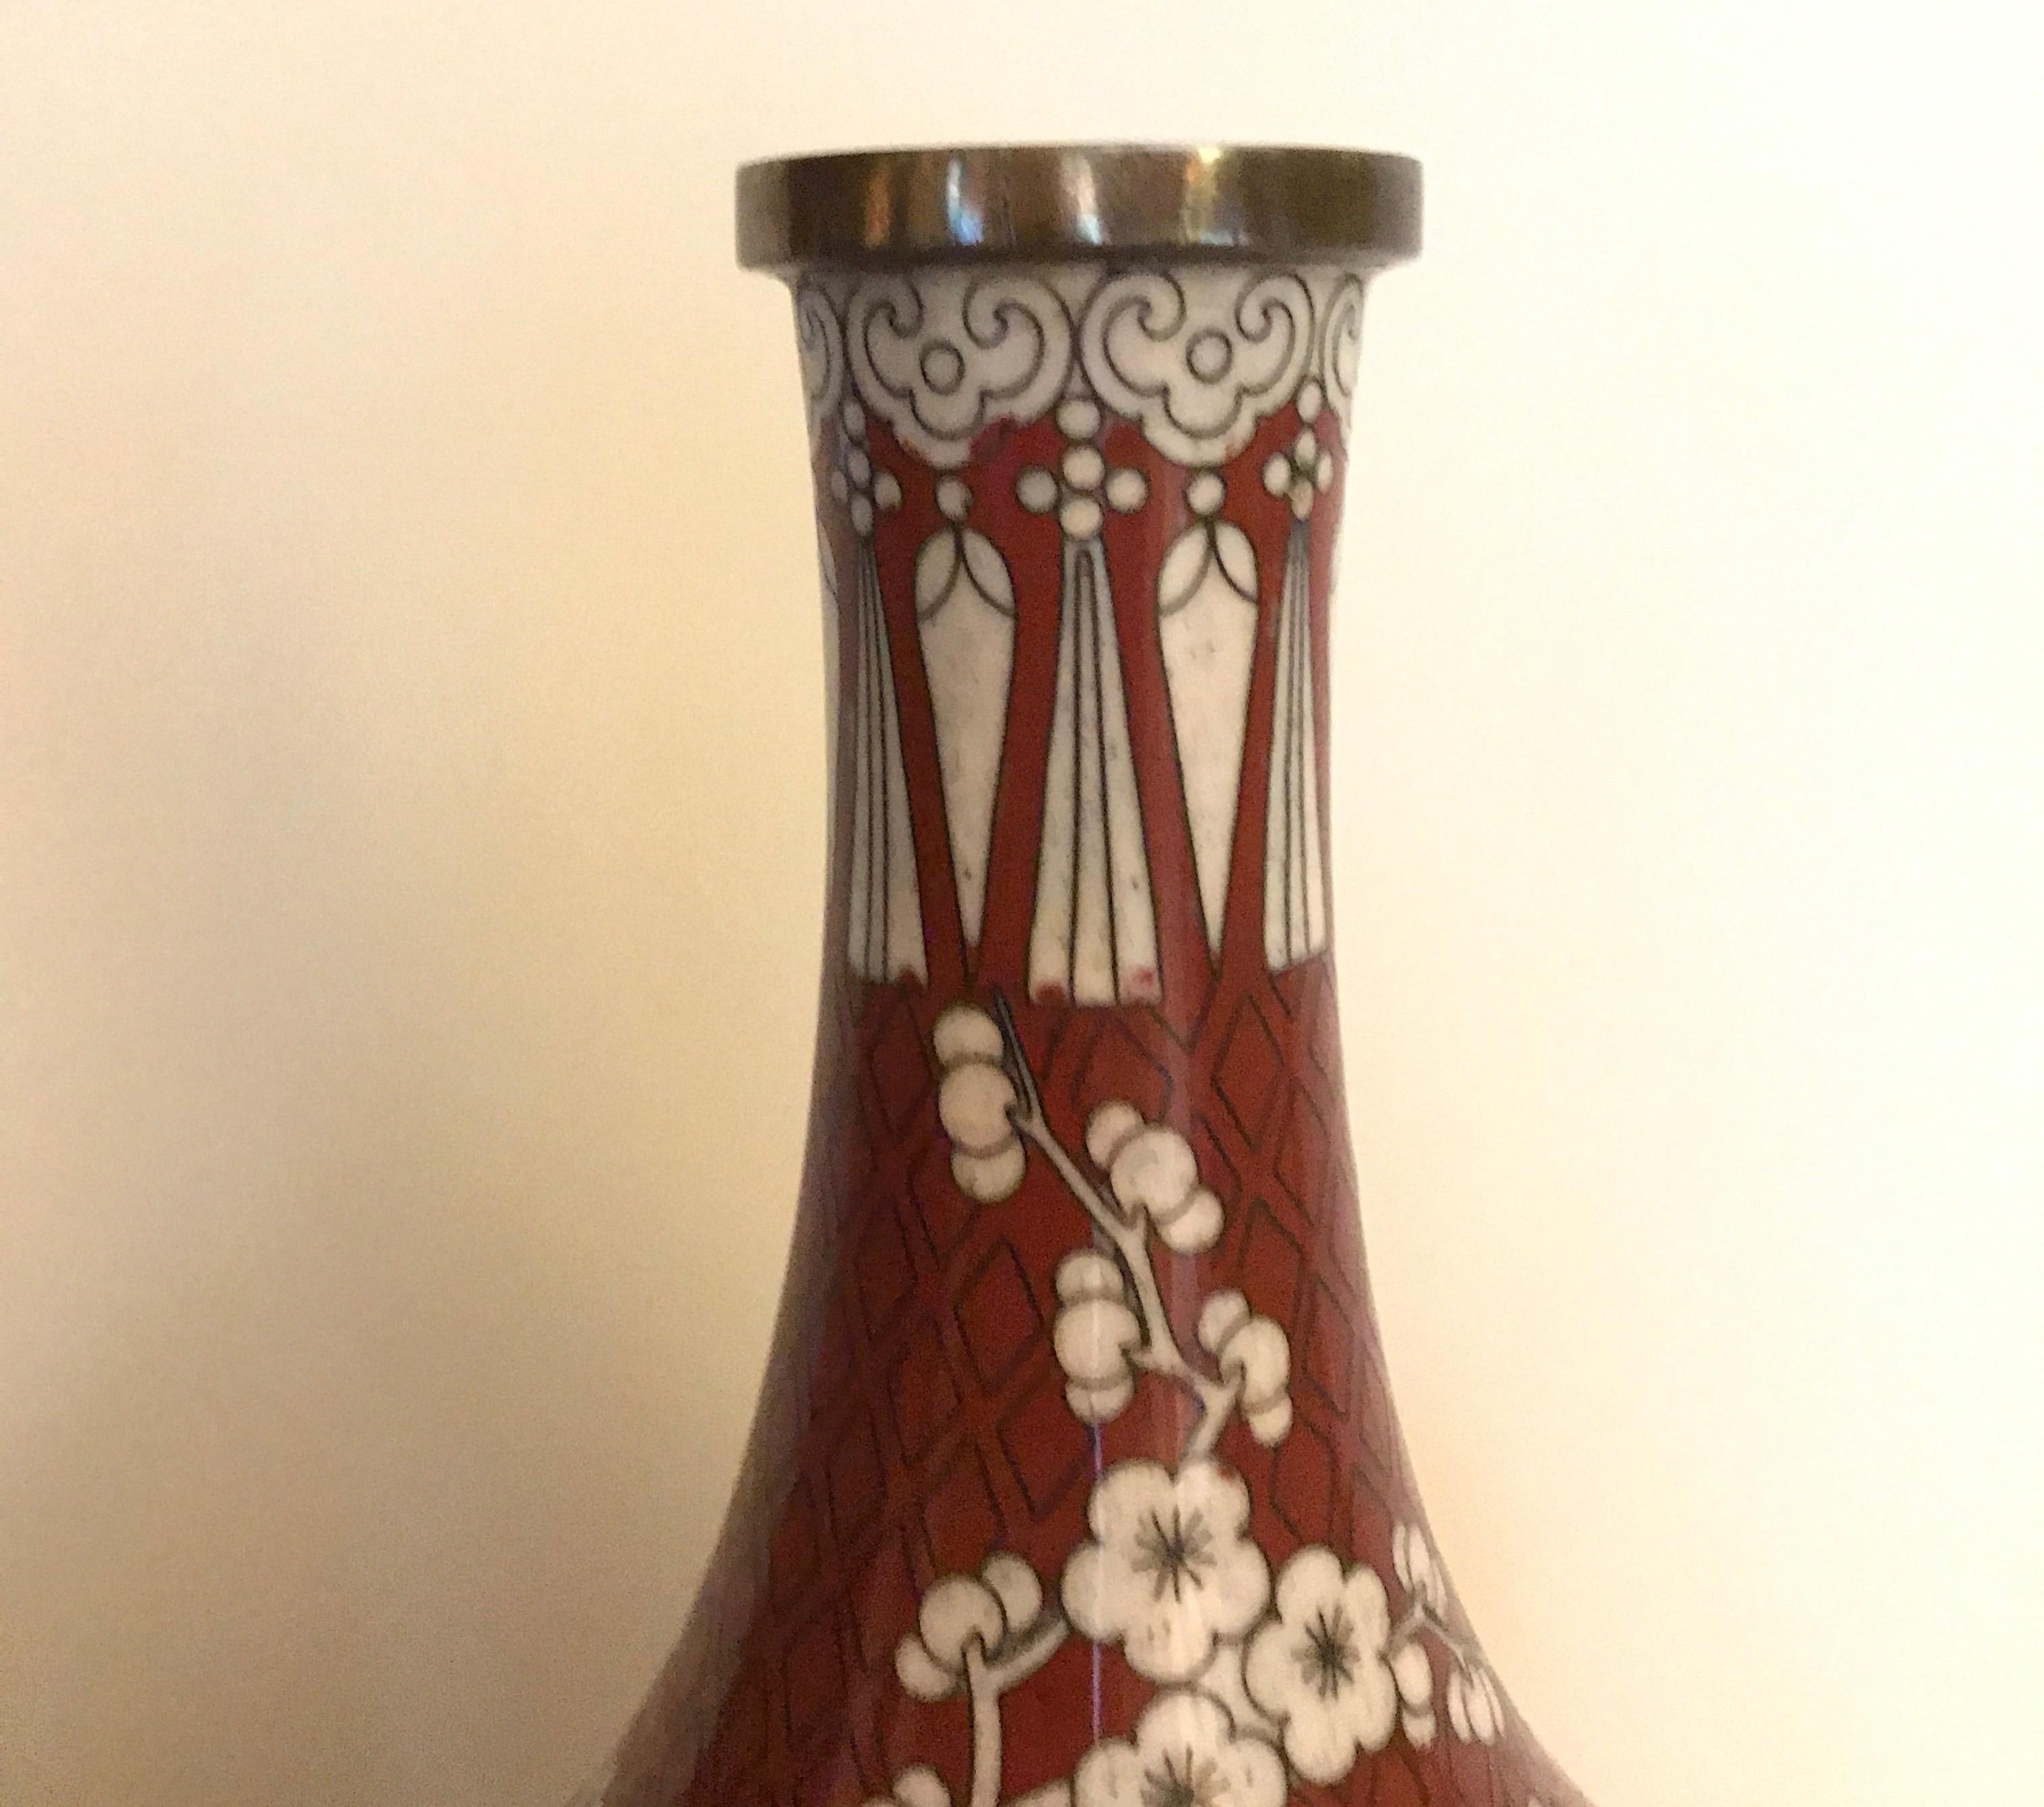 Chinese Export A Fine Pair of Antique Chinese Cloisonné Gord Form Vases, circa 1900 For Sale